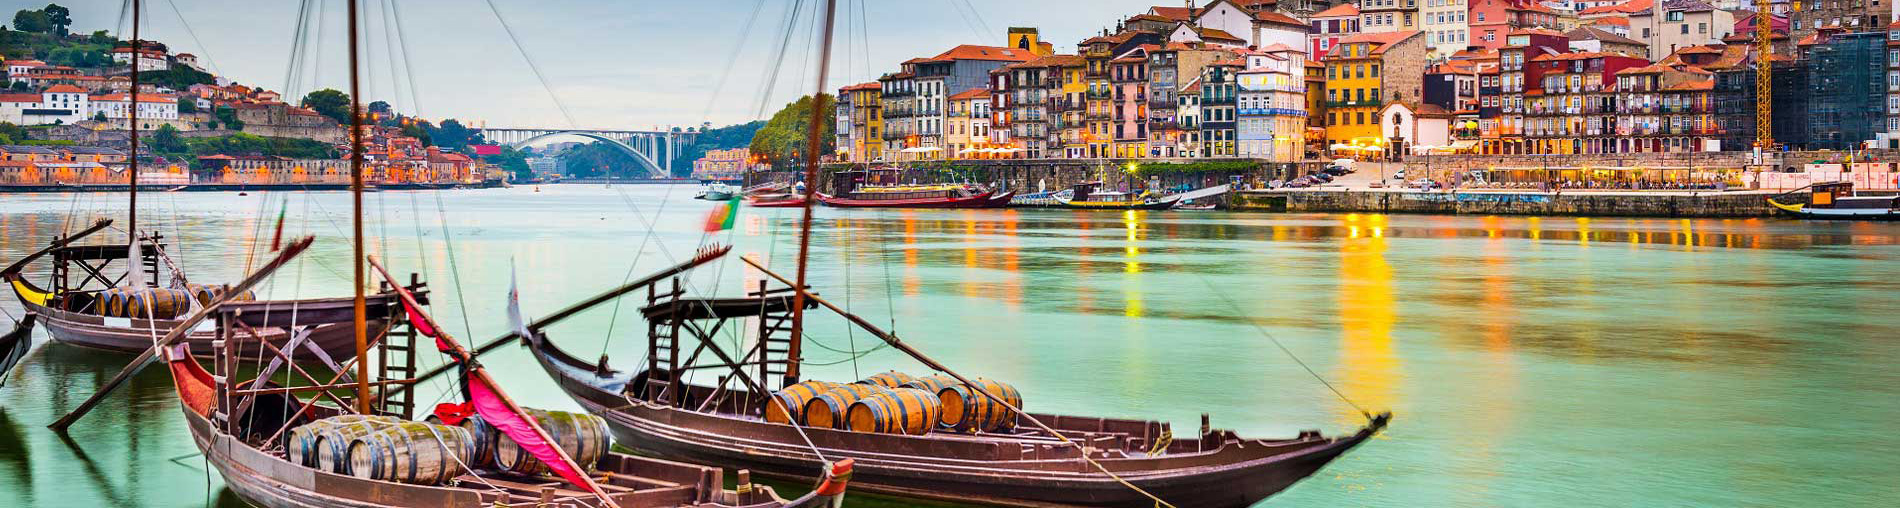 Portugal Holiday Tour Packages From India